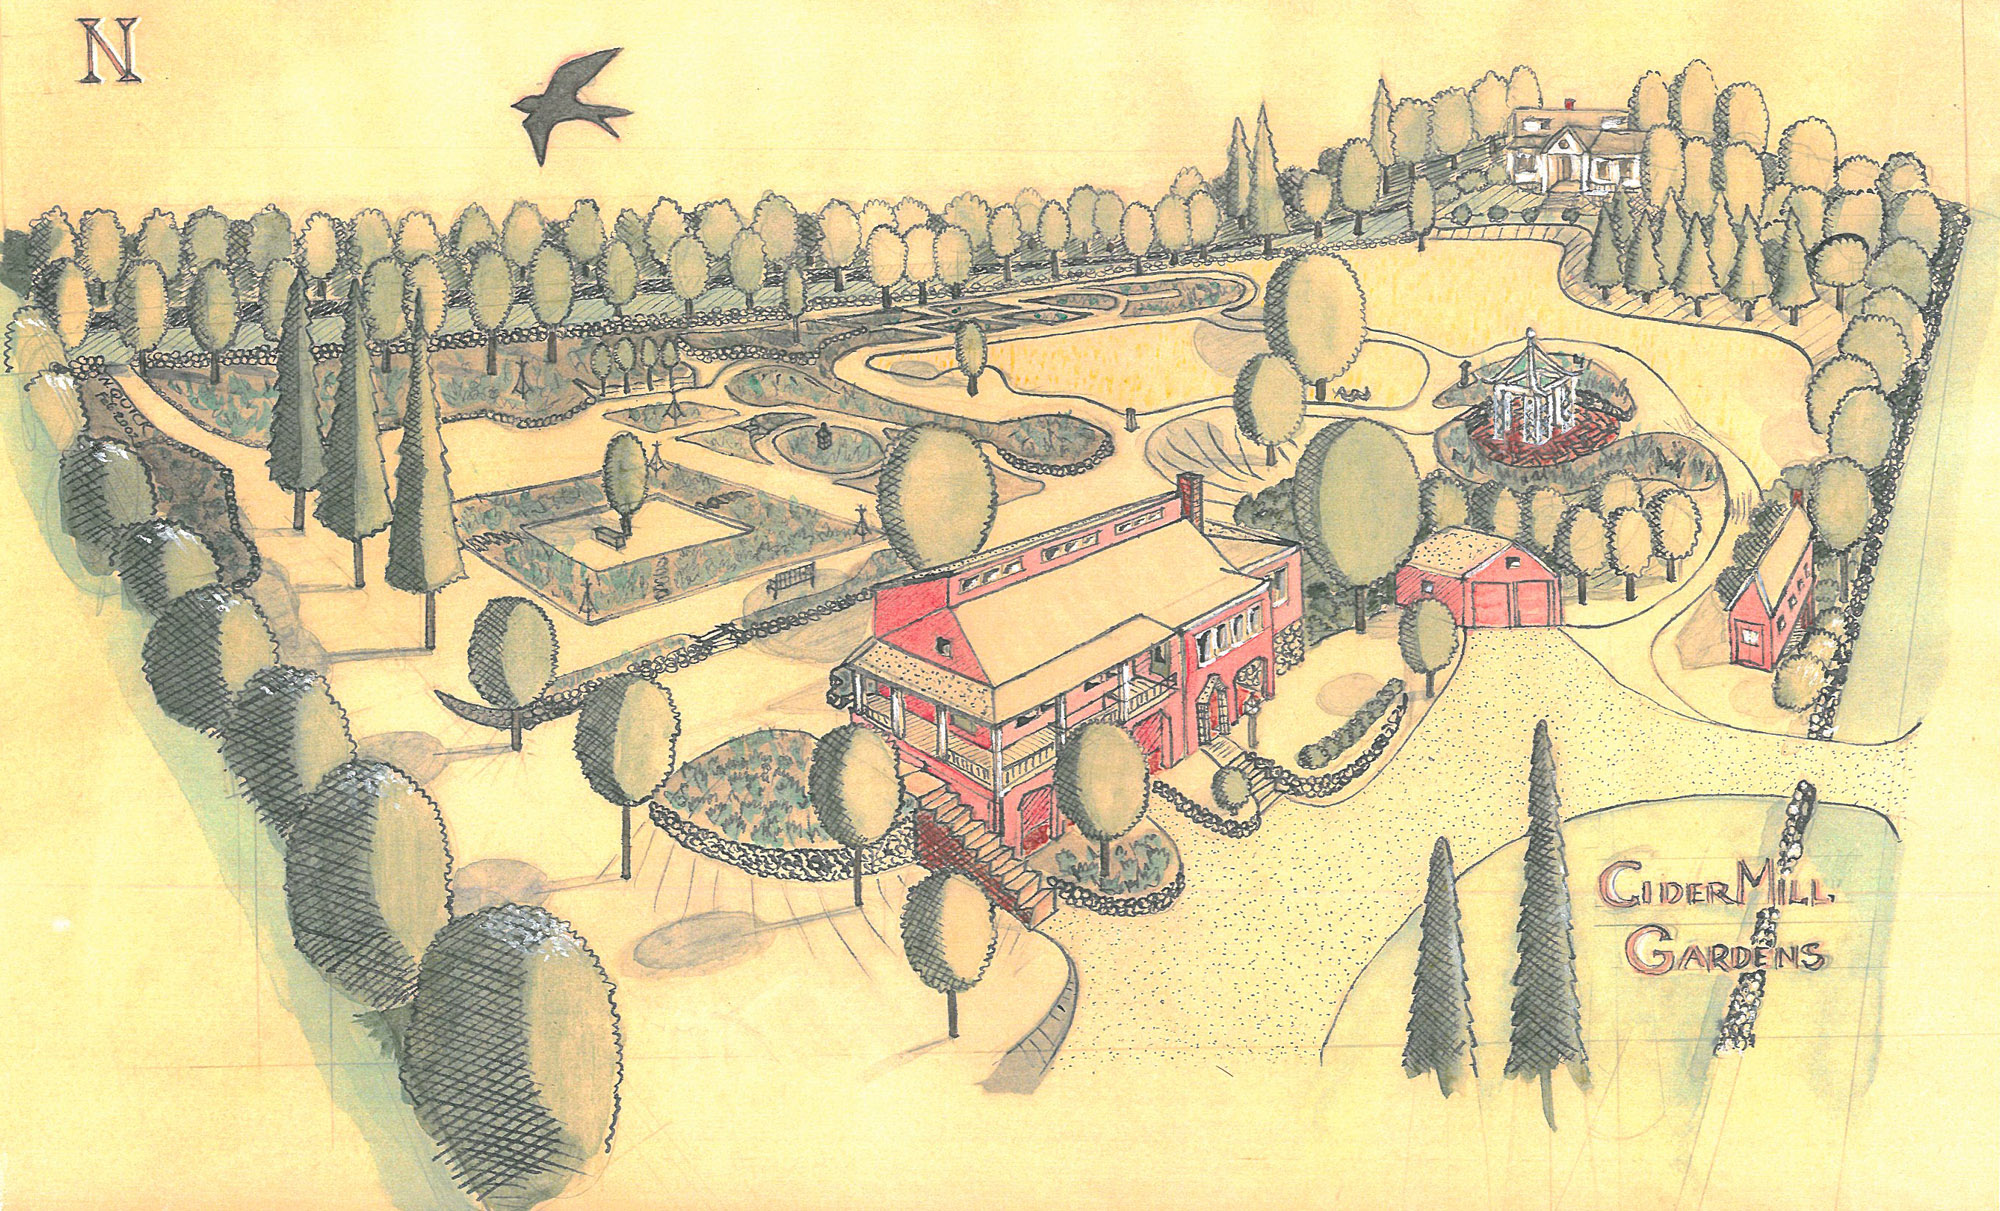 The gardens I made at my previous home in New Hampshire. Pen, ink & watercolor sketch done by Nan, in Feb. 2002 